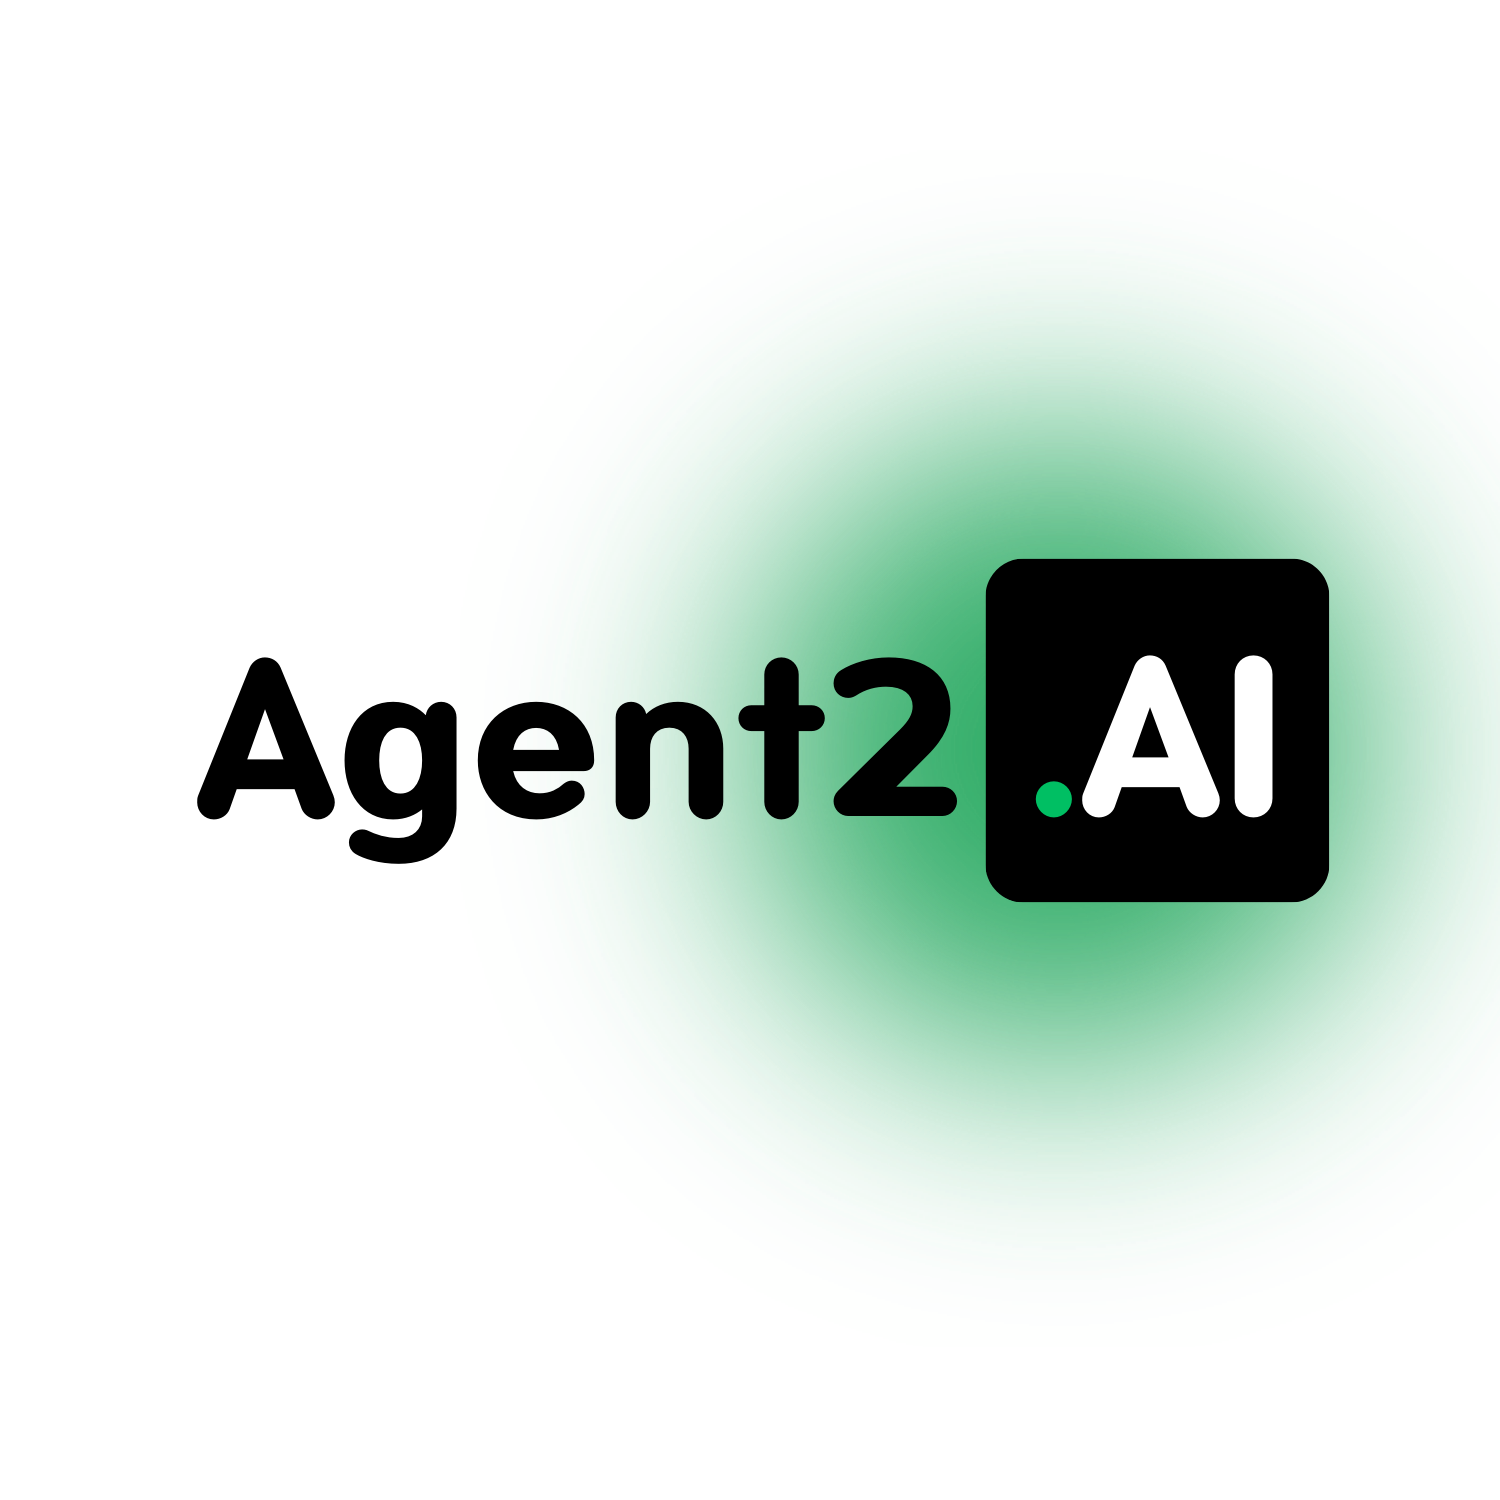 Agent2.AI: Introducing the Era of Digital Employees, Working 24/7 to Maximize Your Earnings